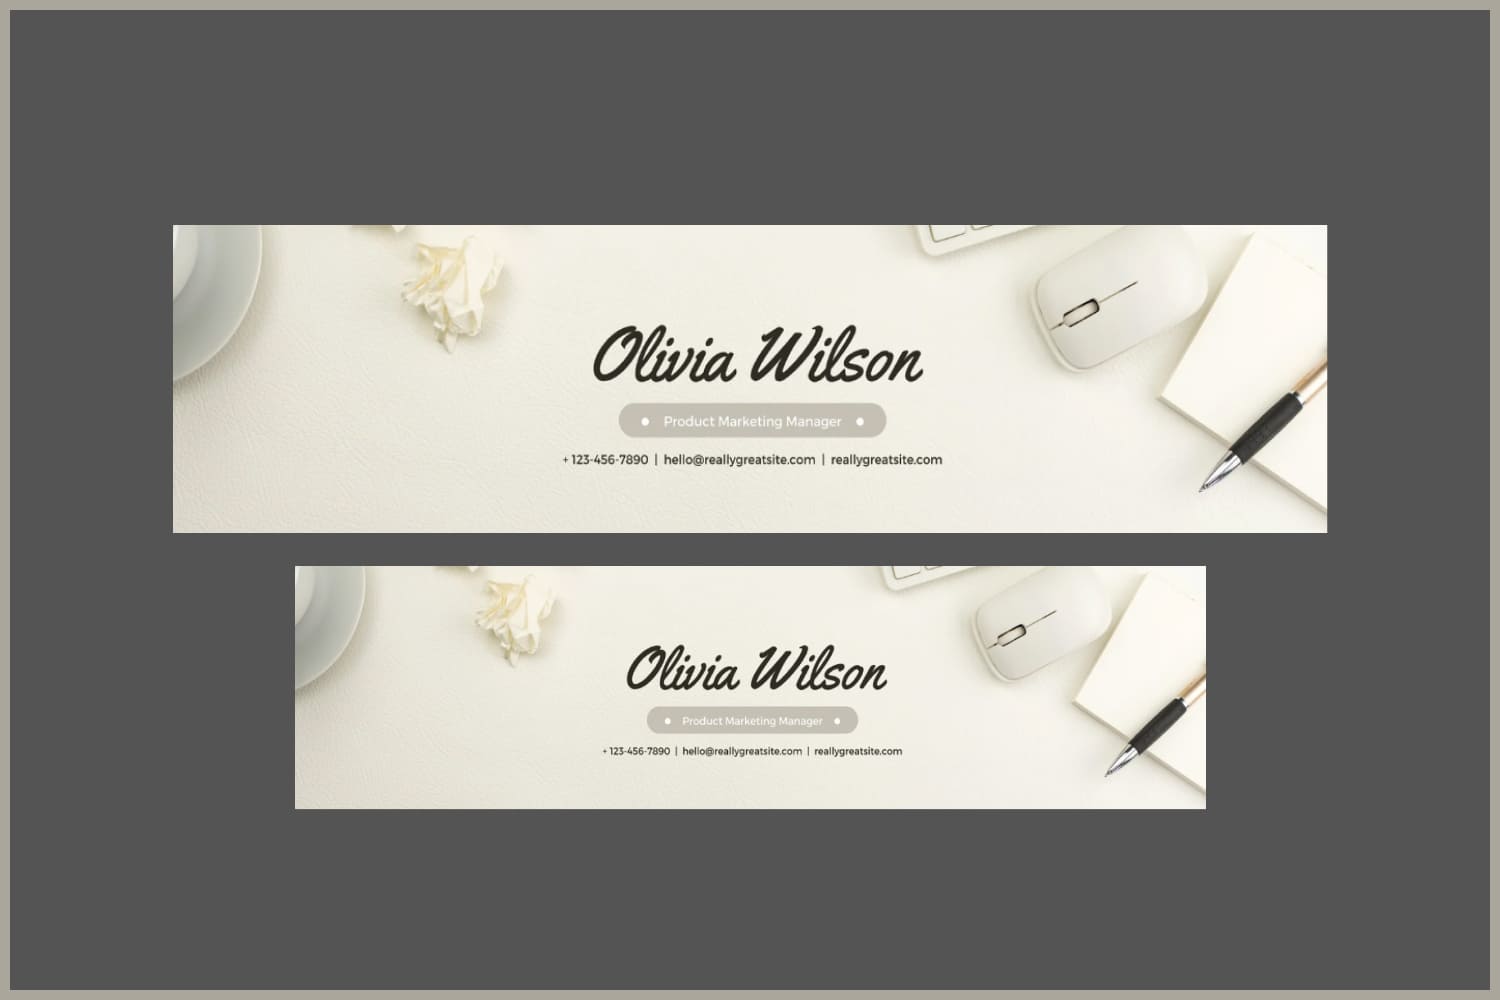 Banners for linkedin with a photo of a computer mouse, notepad and pen on a cream background.